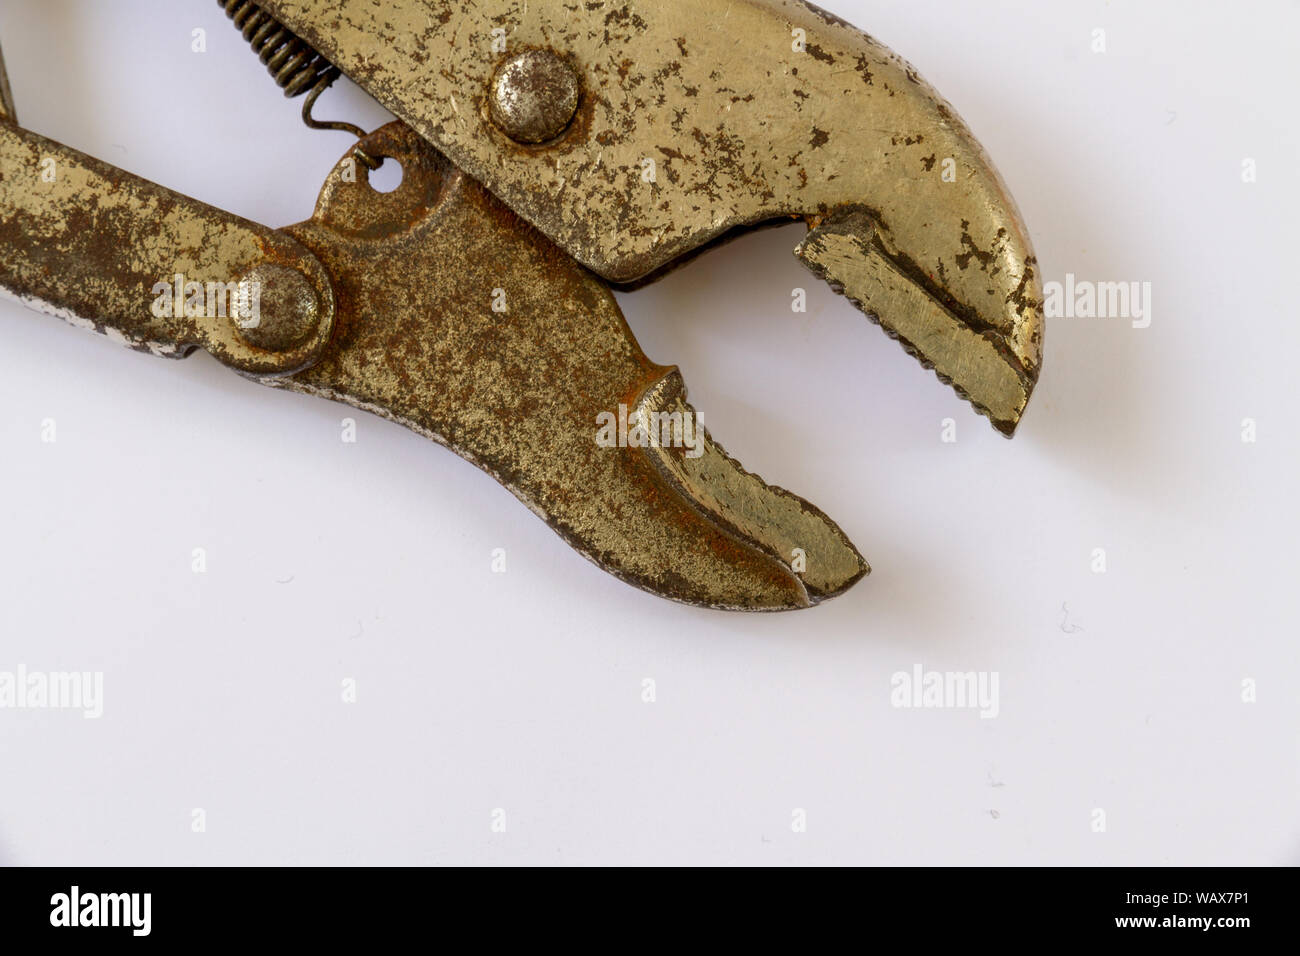 looking down on the jaws of a well worn mole grip or self locking wrench isolated on a white background Stock Photo